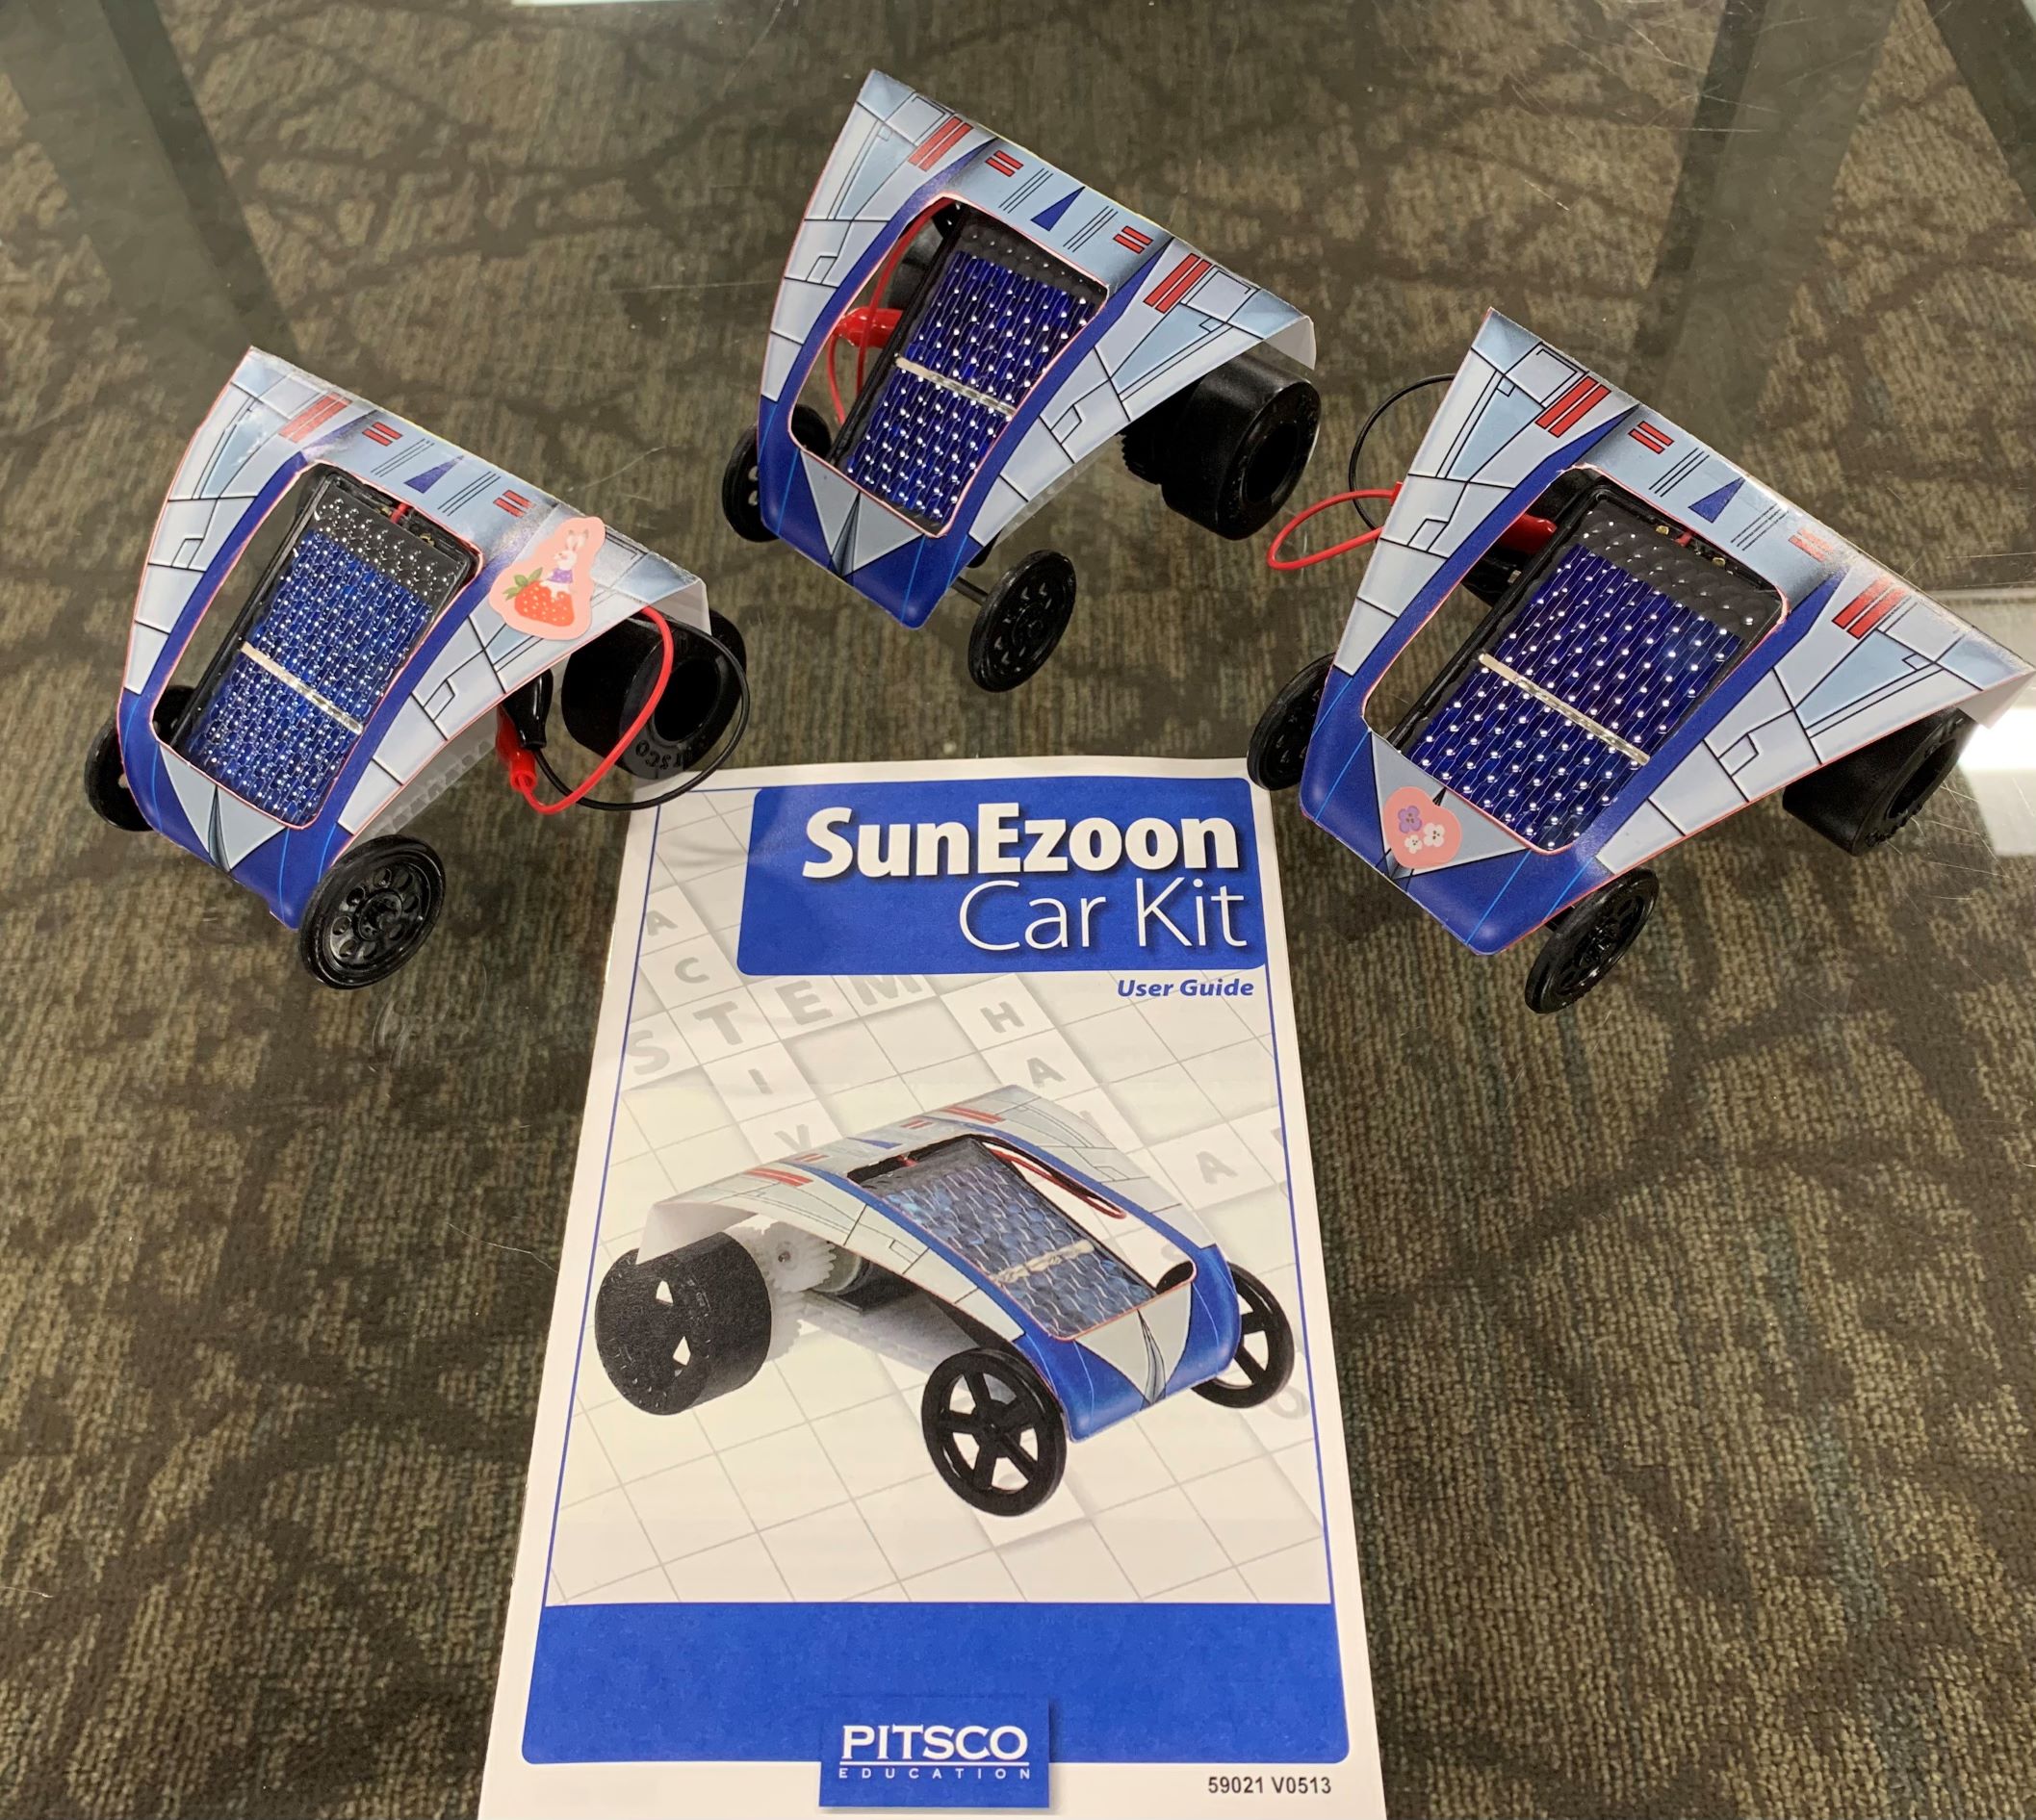 Solar cars provided by Gas South